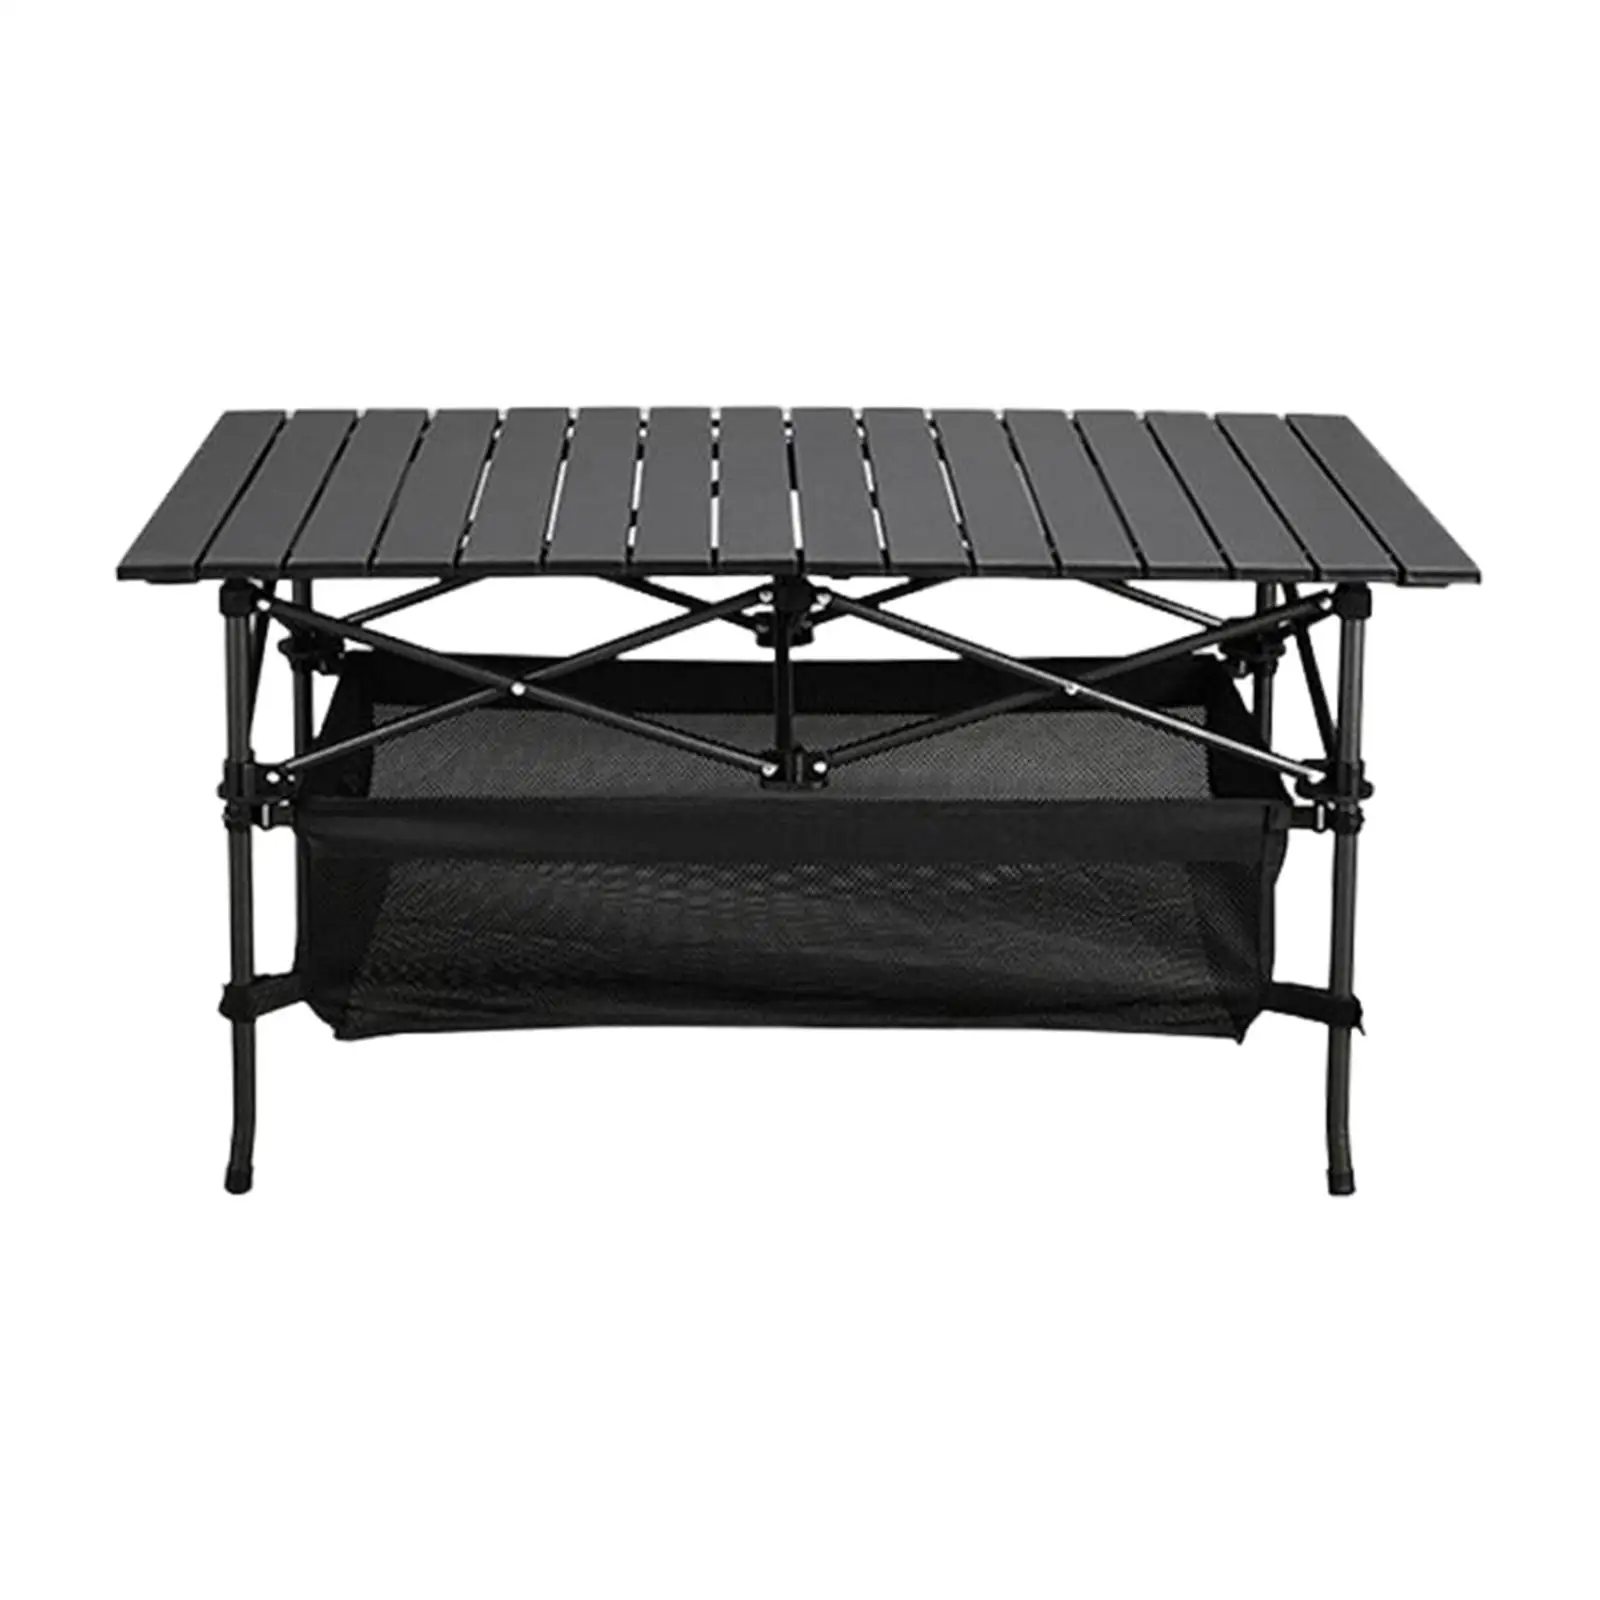 Camping Folding Table with Carrying Bag Portable Rustless for Outdoor Hiking Beach Desk